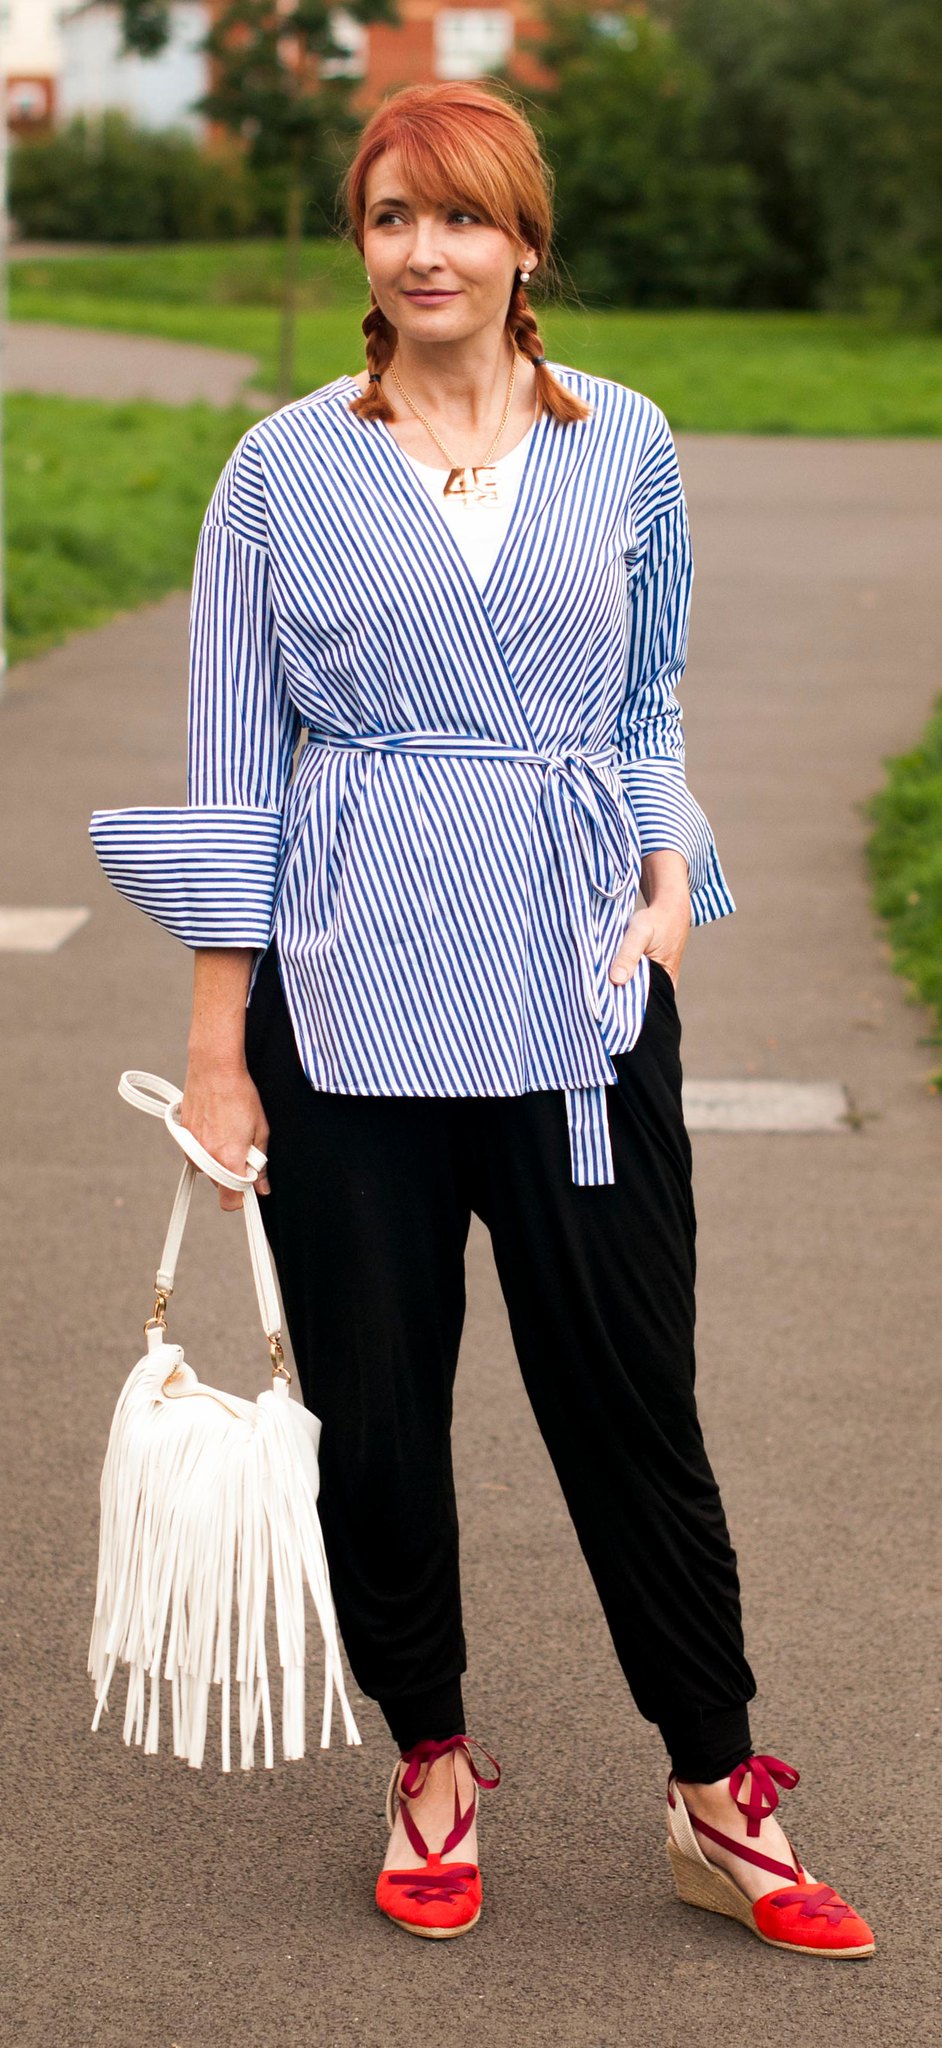 Brights basics for summer: Striped wrapover Mango blouse black harem pants gold 45 Asos necklace red wedge espadrilles white fringed crossbody bag | Not Dressed As Lamb, over 40 style